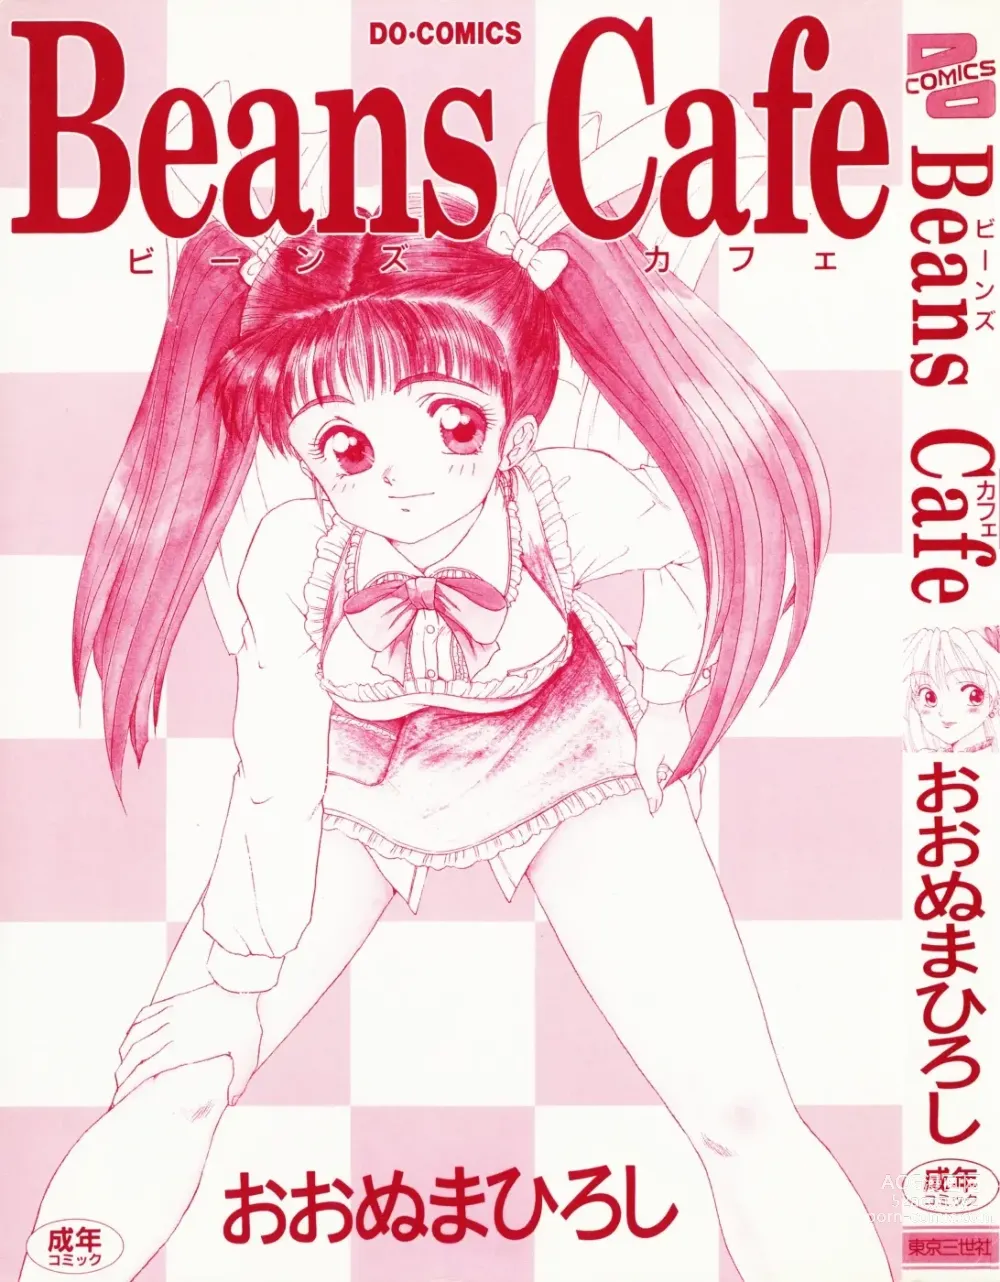 Page 5 of manga Beans Cafe